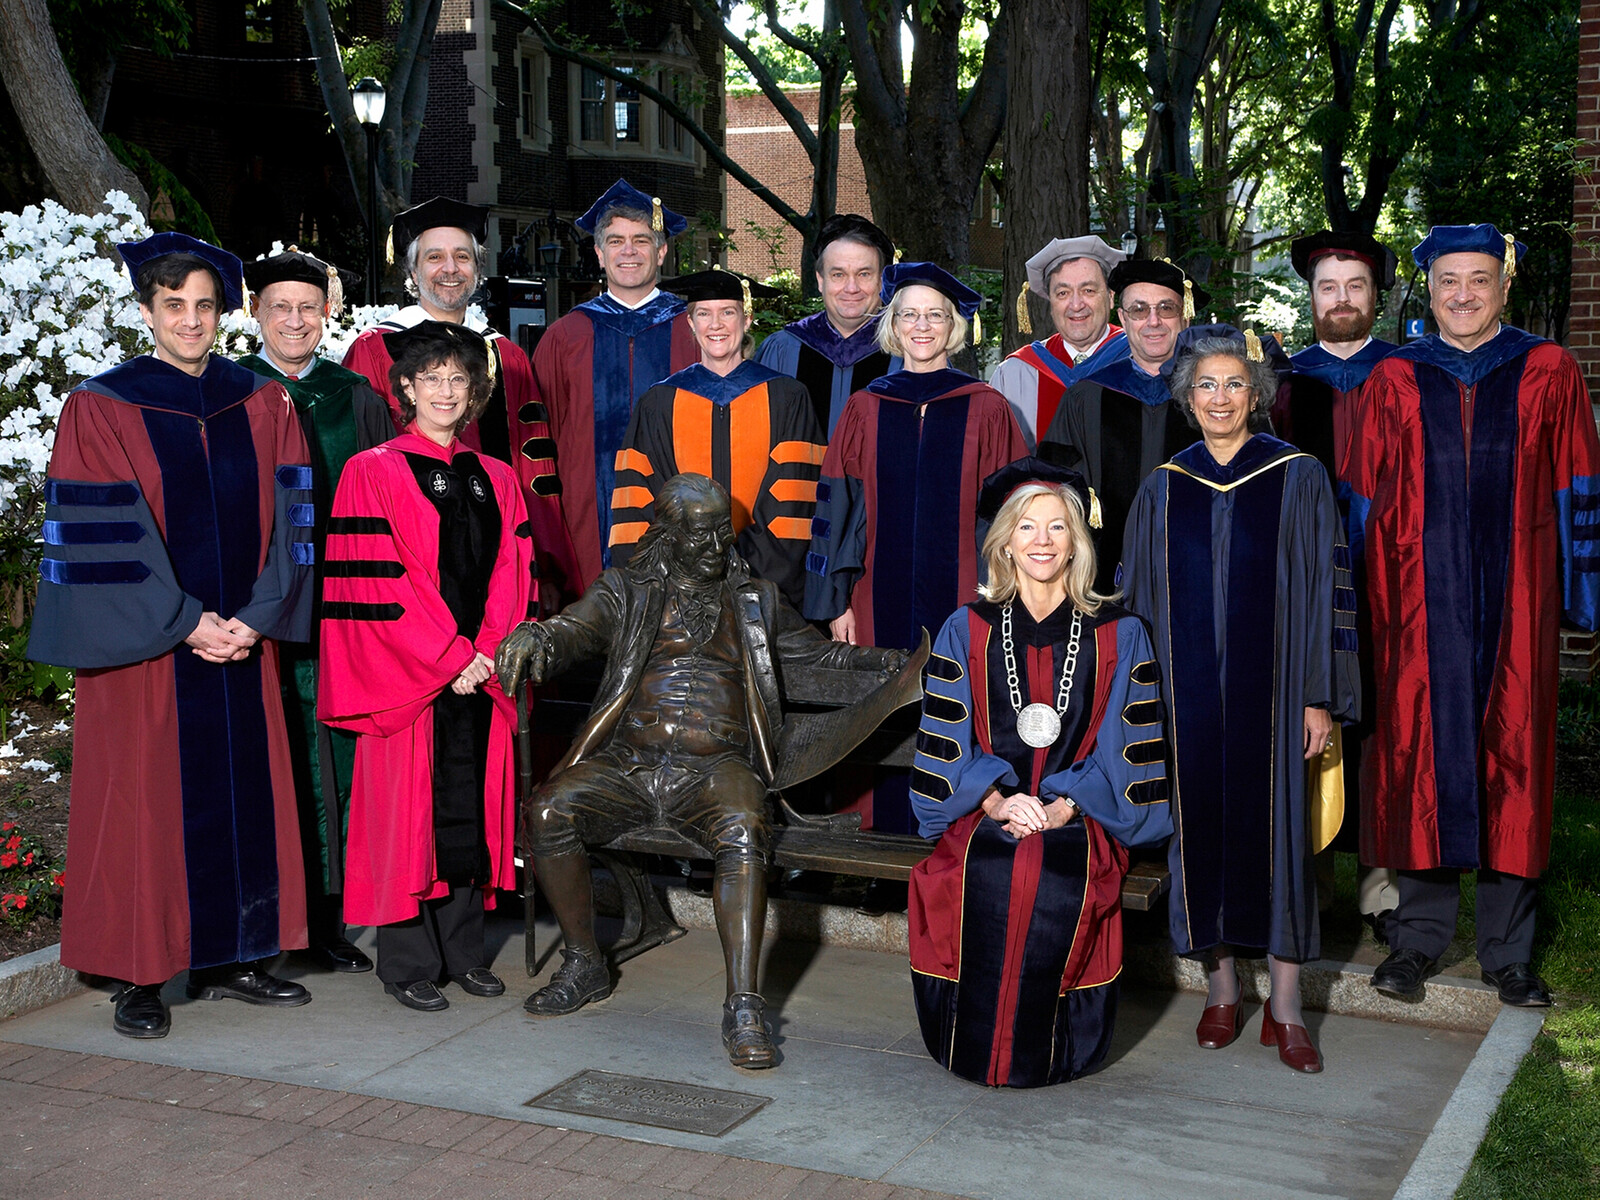 Amy Gutmann and 2007 Penn honorary degree recipients in regalia